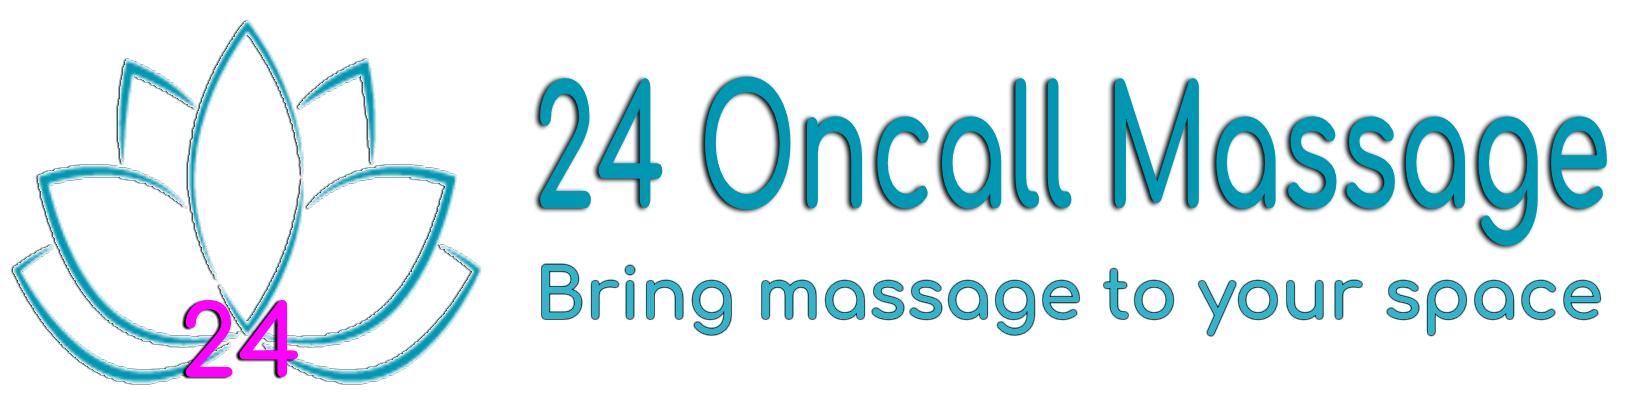 24 Hrs On-call Massage in Bali